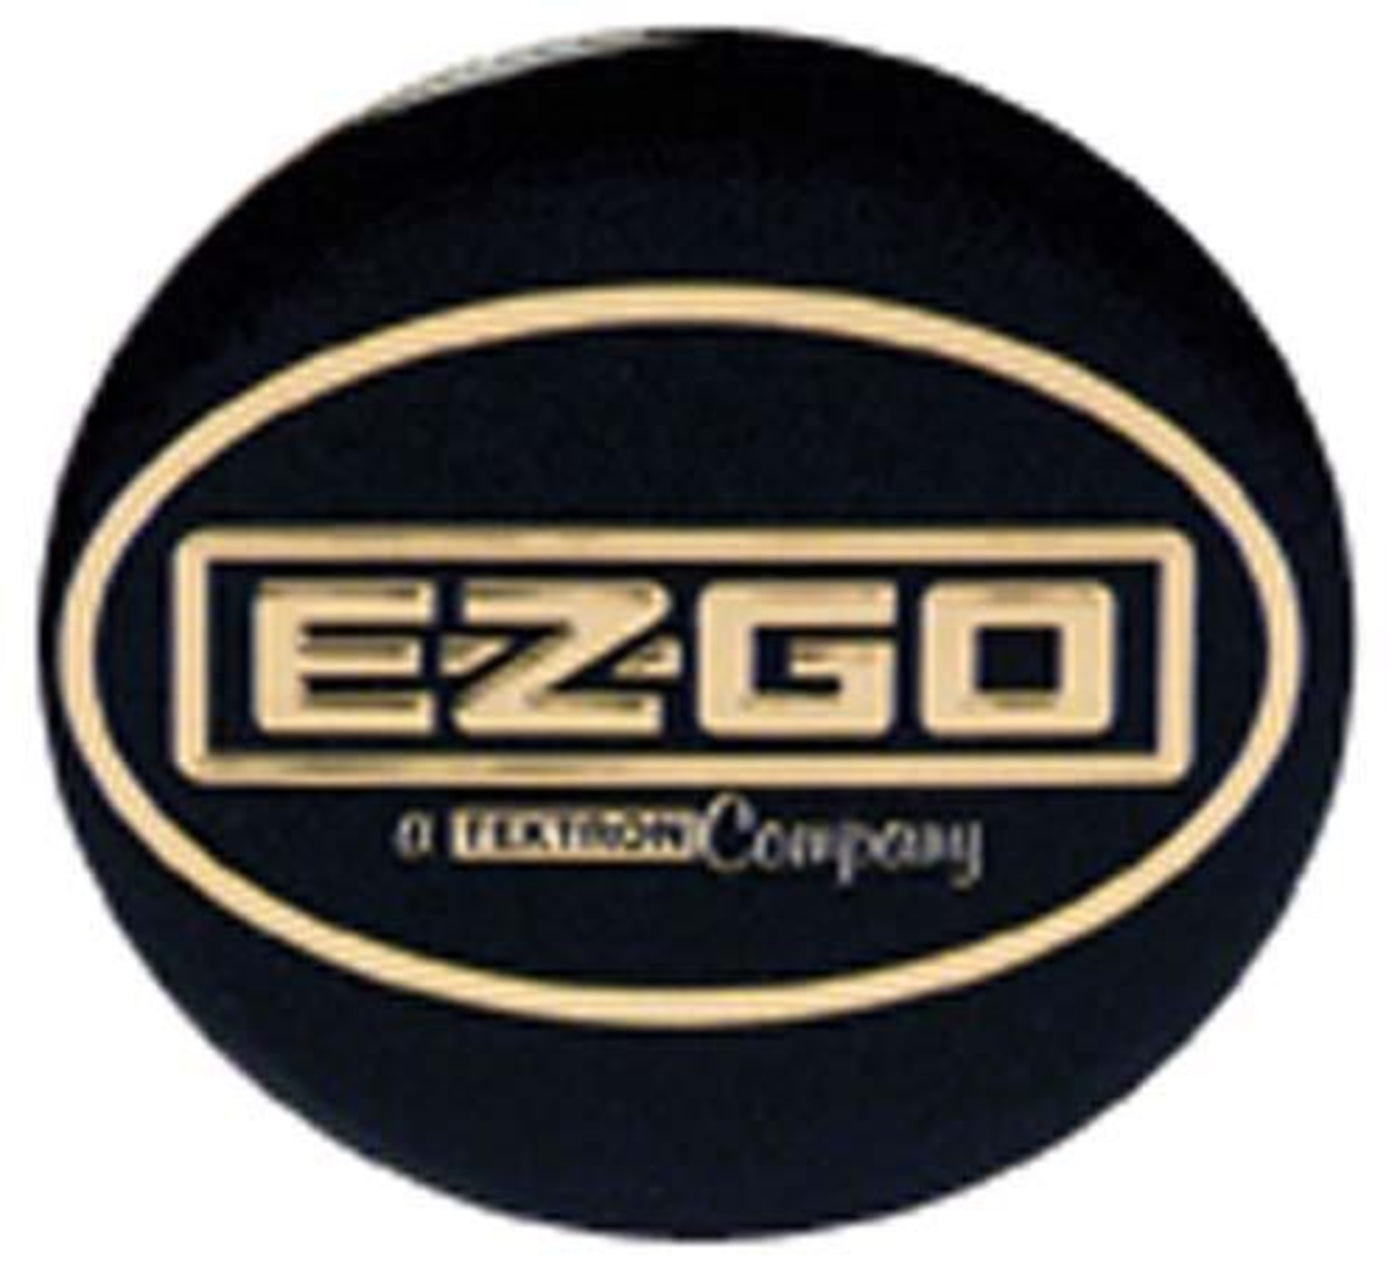 E-Z-GO Steering Wheel Decal (Years 1996-Up)